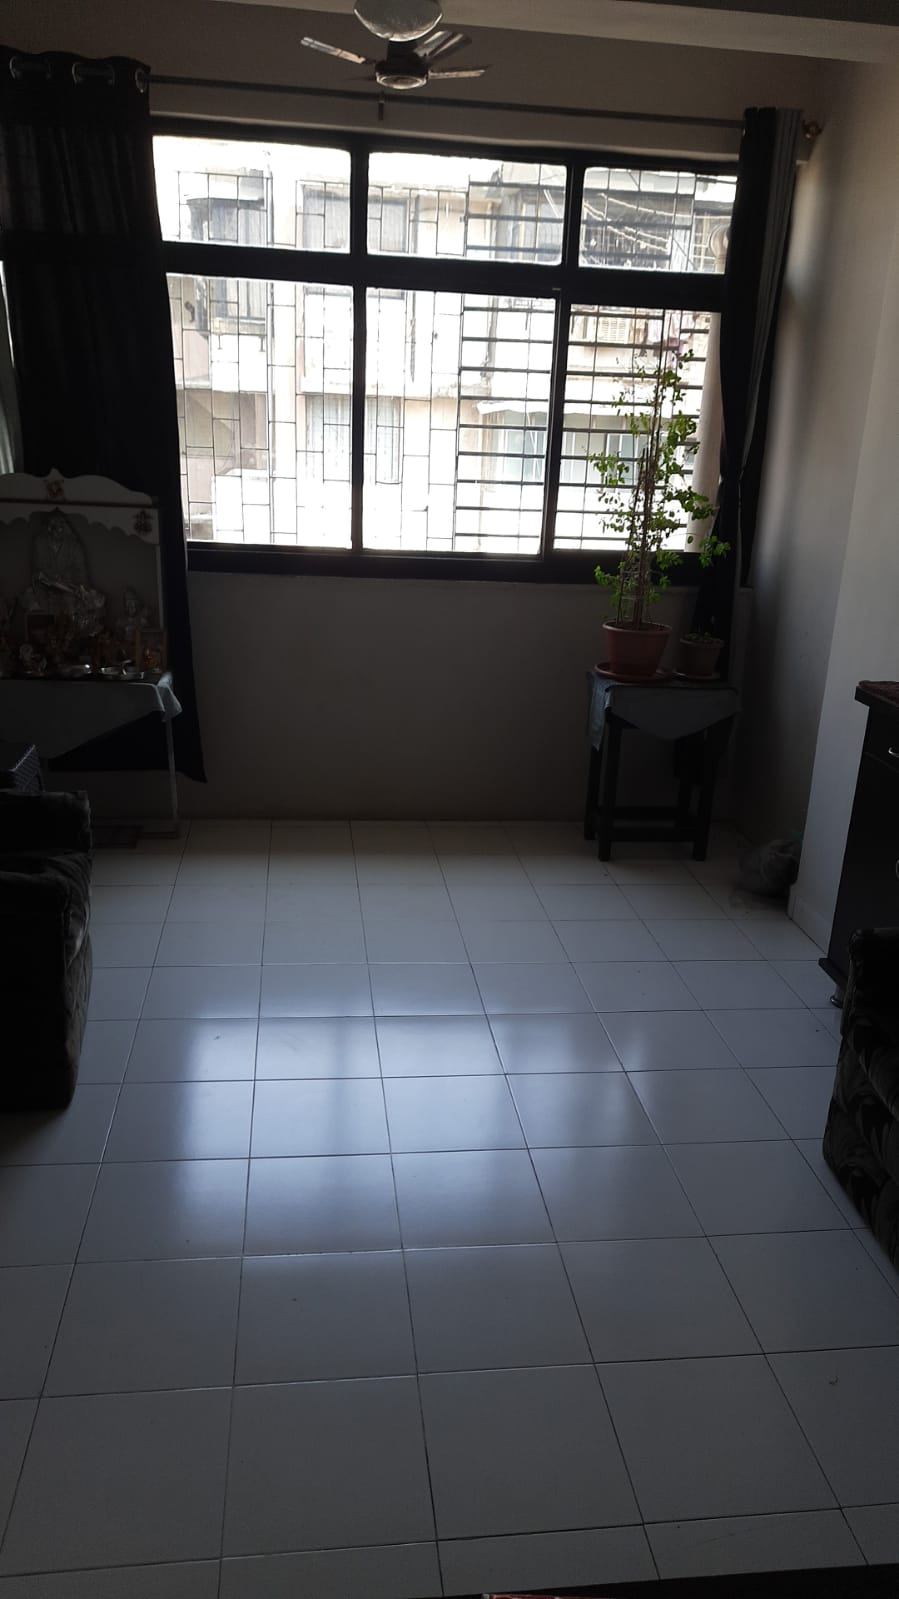 1 Bed/ 1 Bath Rent Apartment/ Flat; 180 sq. ft. carpet area, Furnished for rent @Navjivan Society